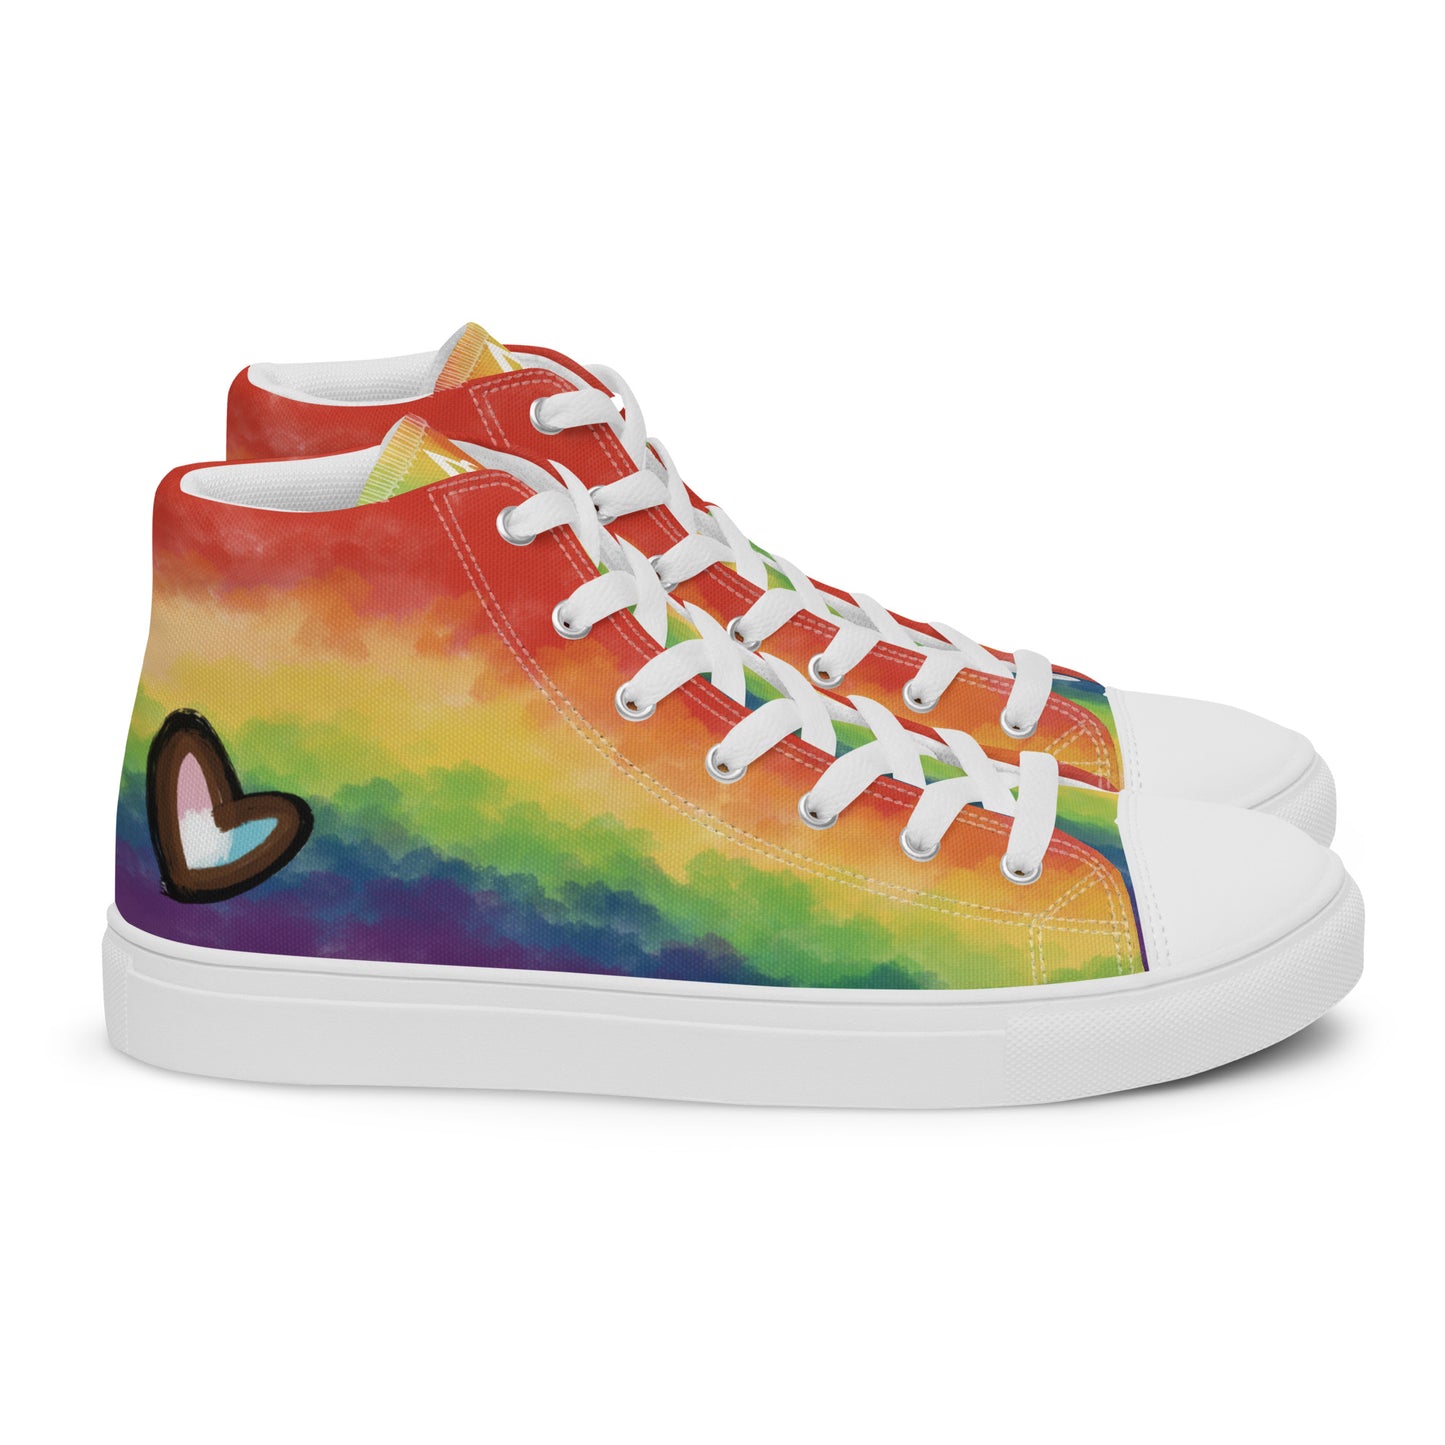 Right view: A pair of high top shoes with rainbow striped clouds on the sides and a double heart in black and brown with the trans flag colors inside.